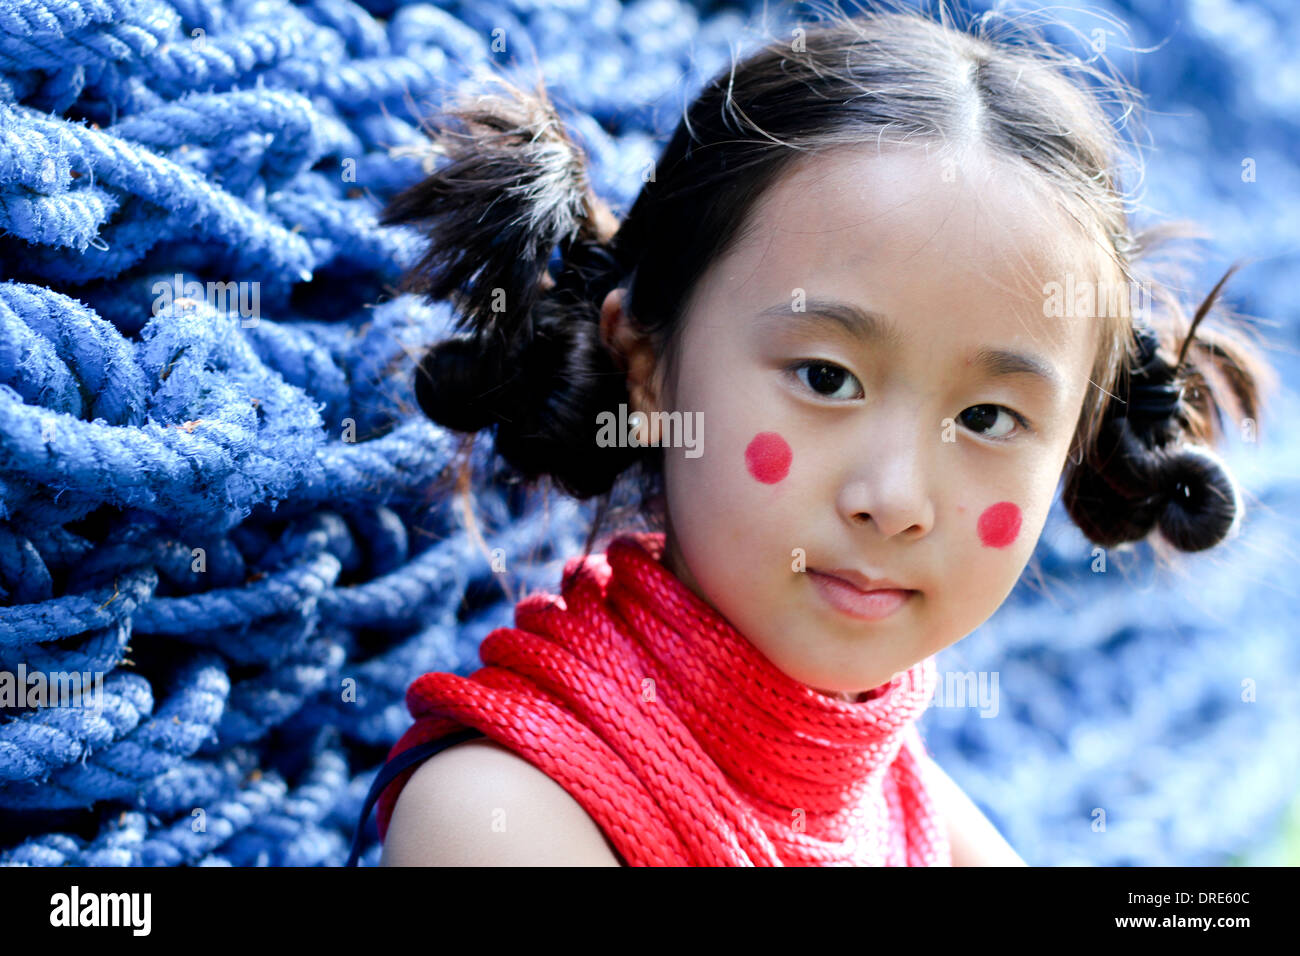 Asian girl in front of blue rope wall Stock Photo